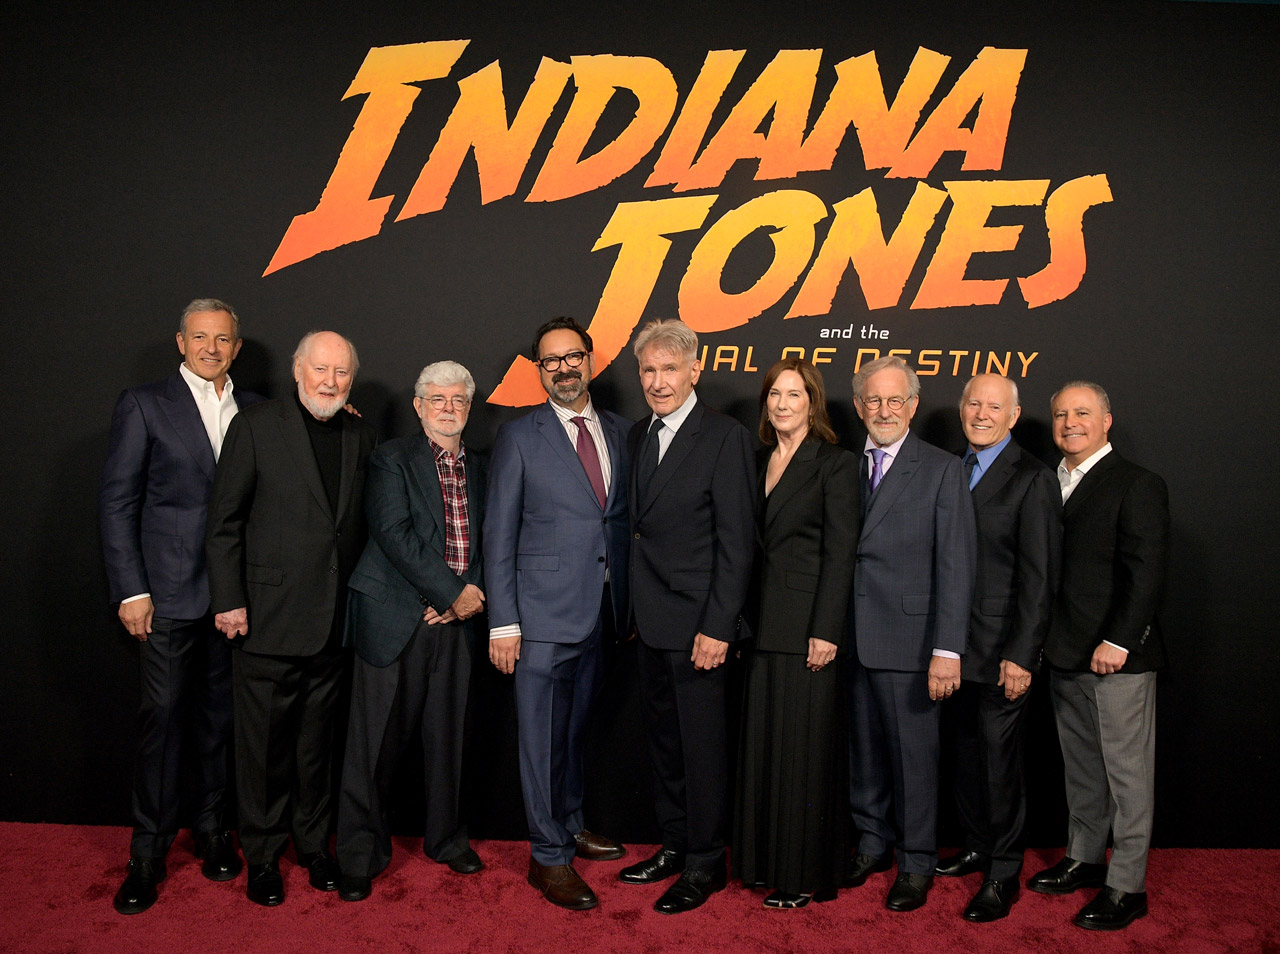 (L-R) Bob Iger, CEO, Walt Disney Company, John Williams, George Lucas, James Mangold, Harrison Ford, Kathleen Kennedy, President, Lucasfilm, Steven Spielberg, Frank Marshall and Alan Bergman, Chairman, Disney Studios Content attends the Indiana Jones and the Dial of Destiny U.S. Premiere at the Dolby Theatre in Hollywood, California on June 14, 2023.